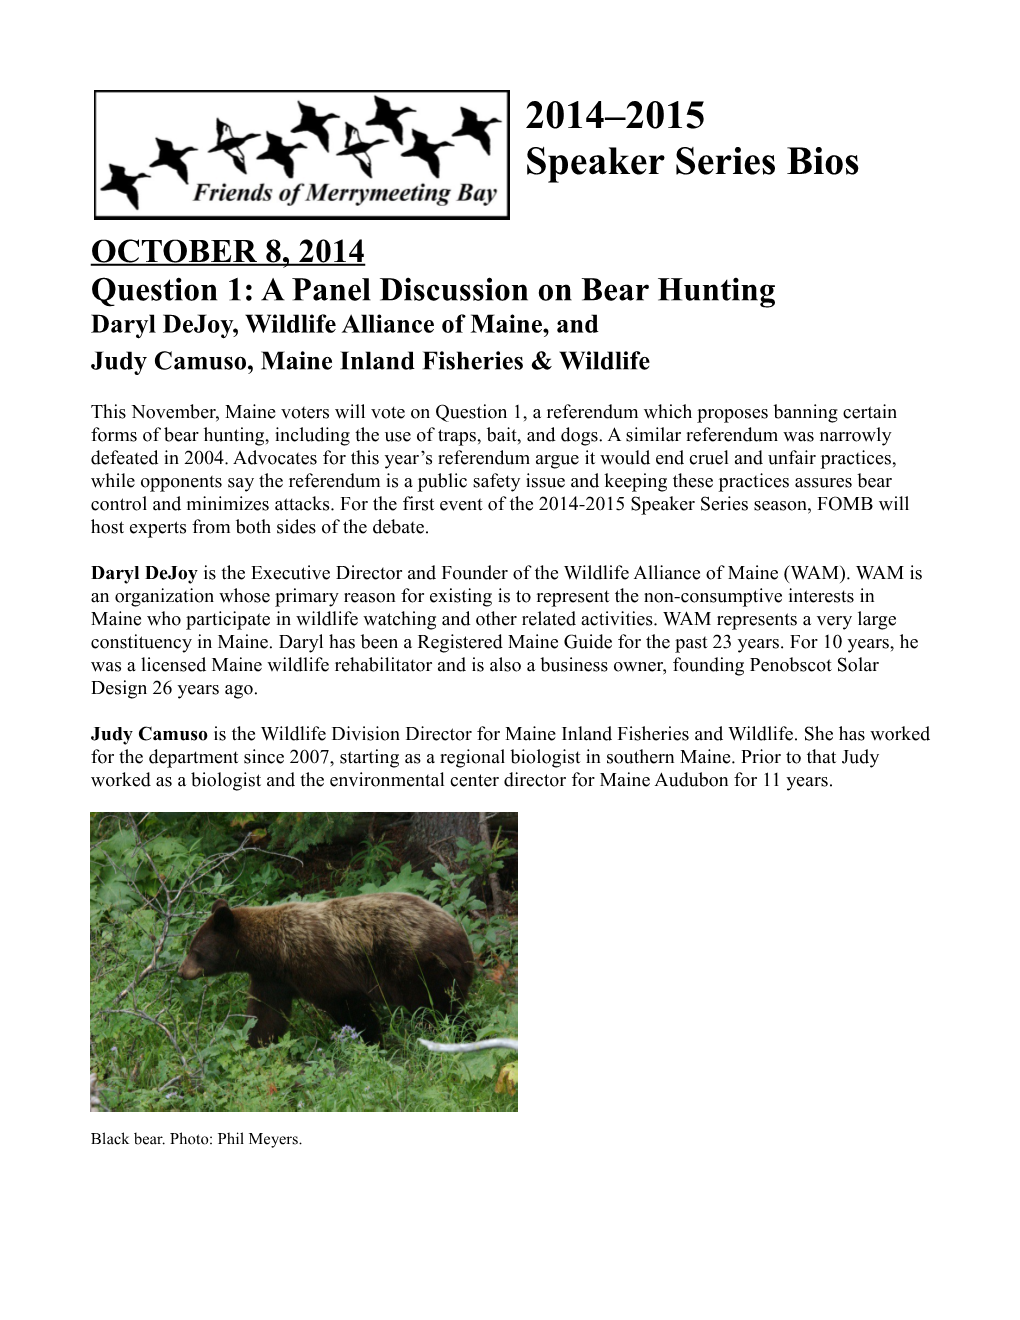 Question 1: a Panel Discussion on Bear Hunting